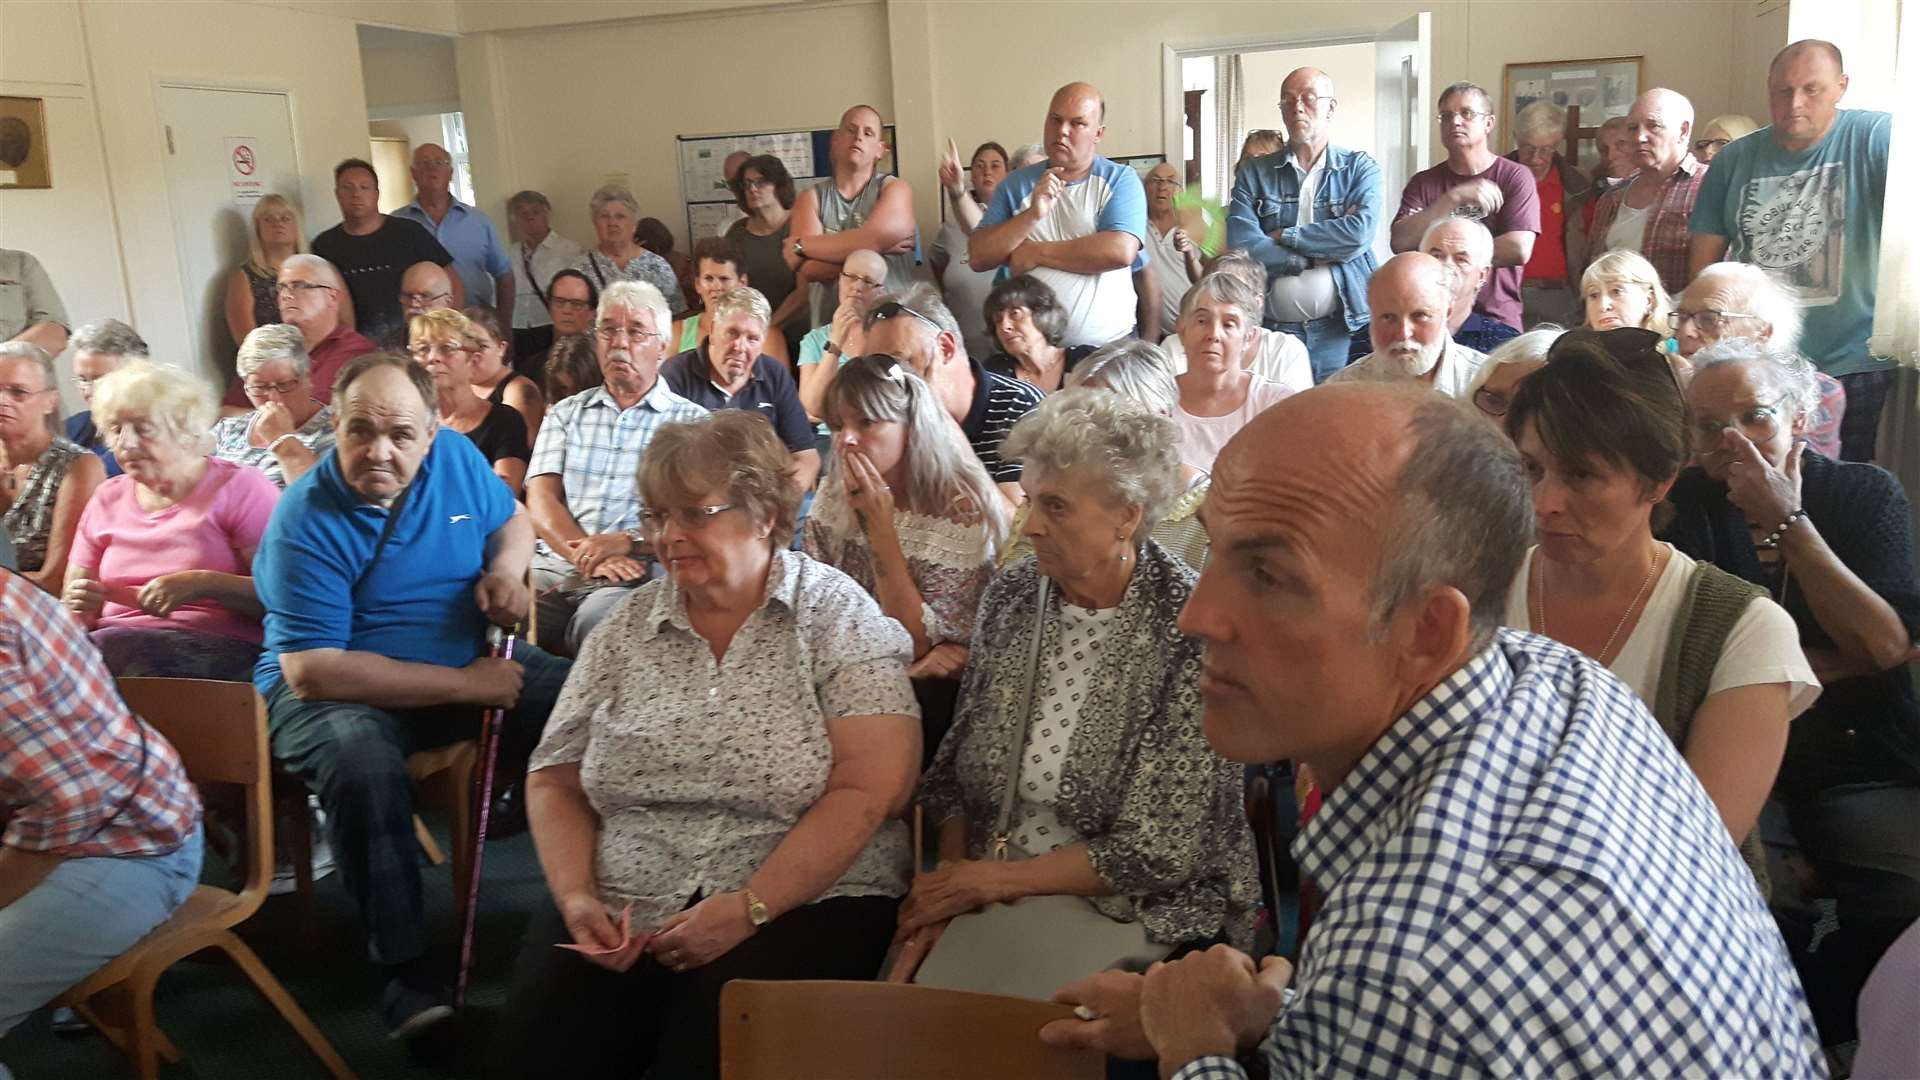 Aycliffe Church Centre was needed to discuss problems affecting the entire community. This packed meeting, in July 2017, concerned noise nuisance from lorries. Picture: Sam Lennon